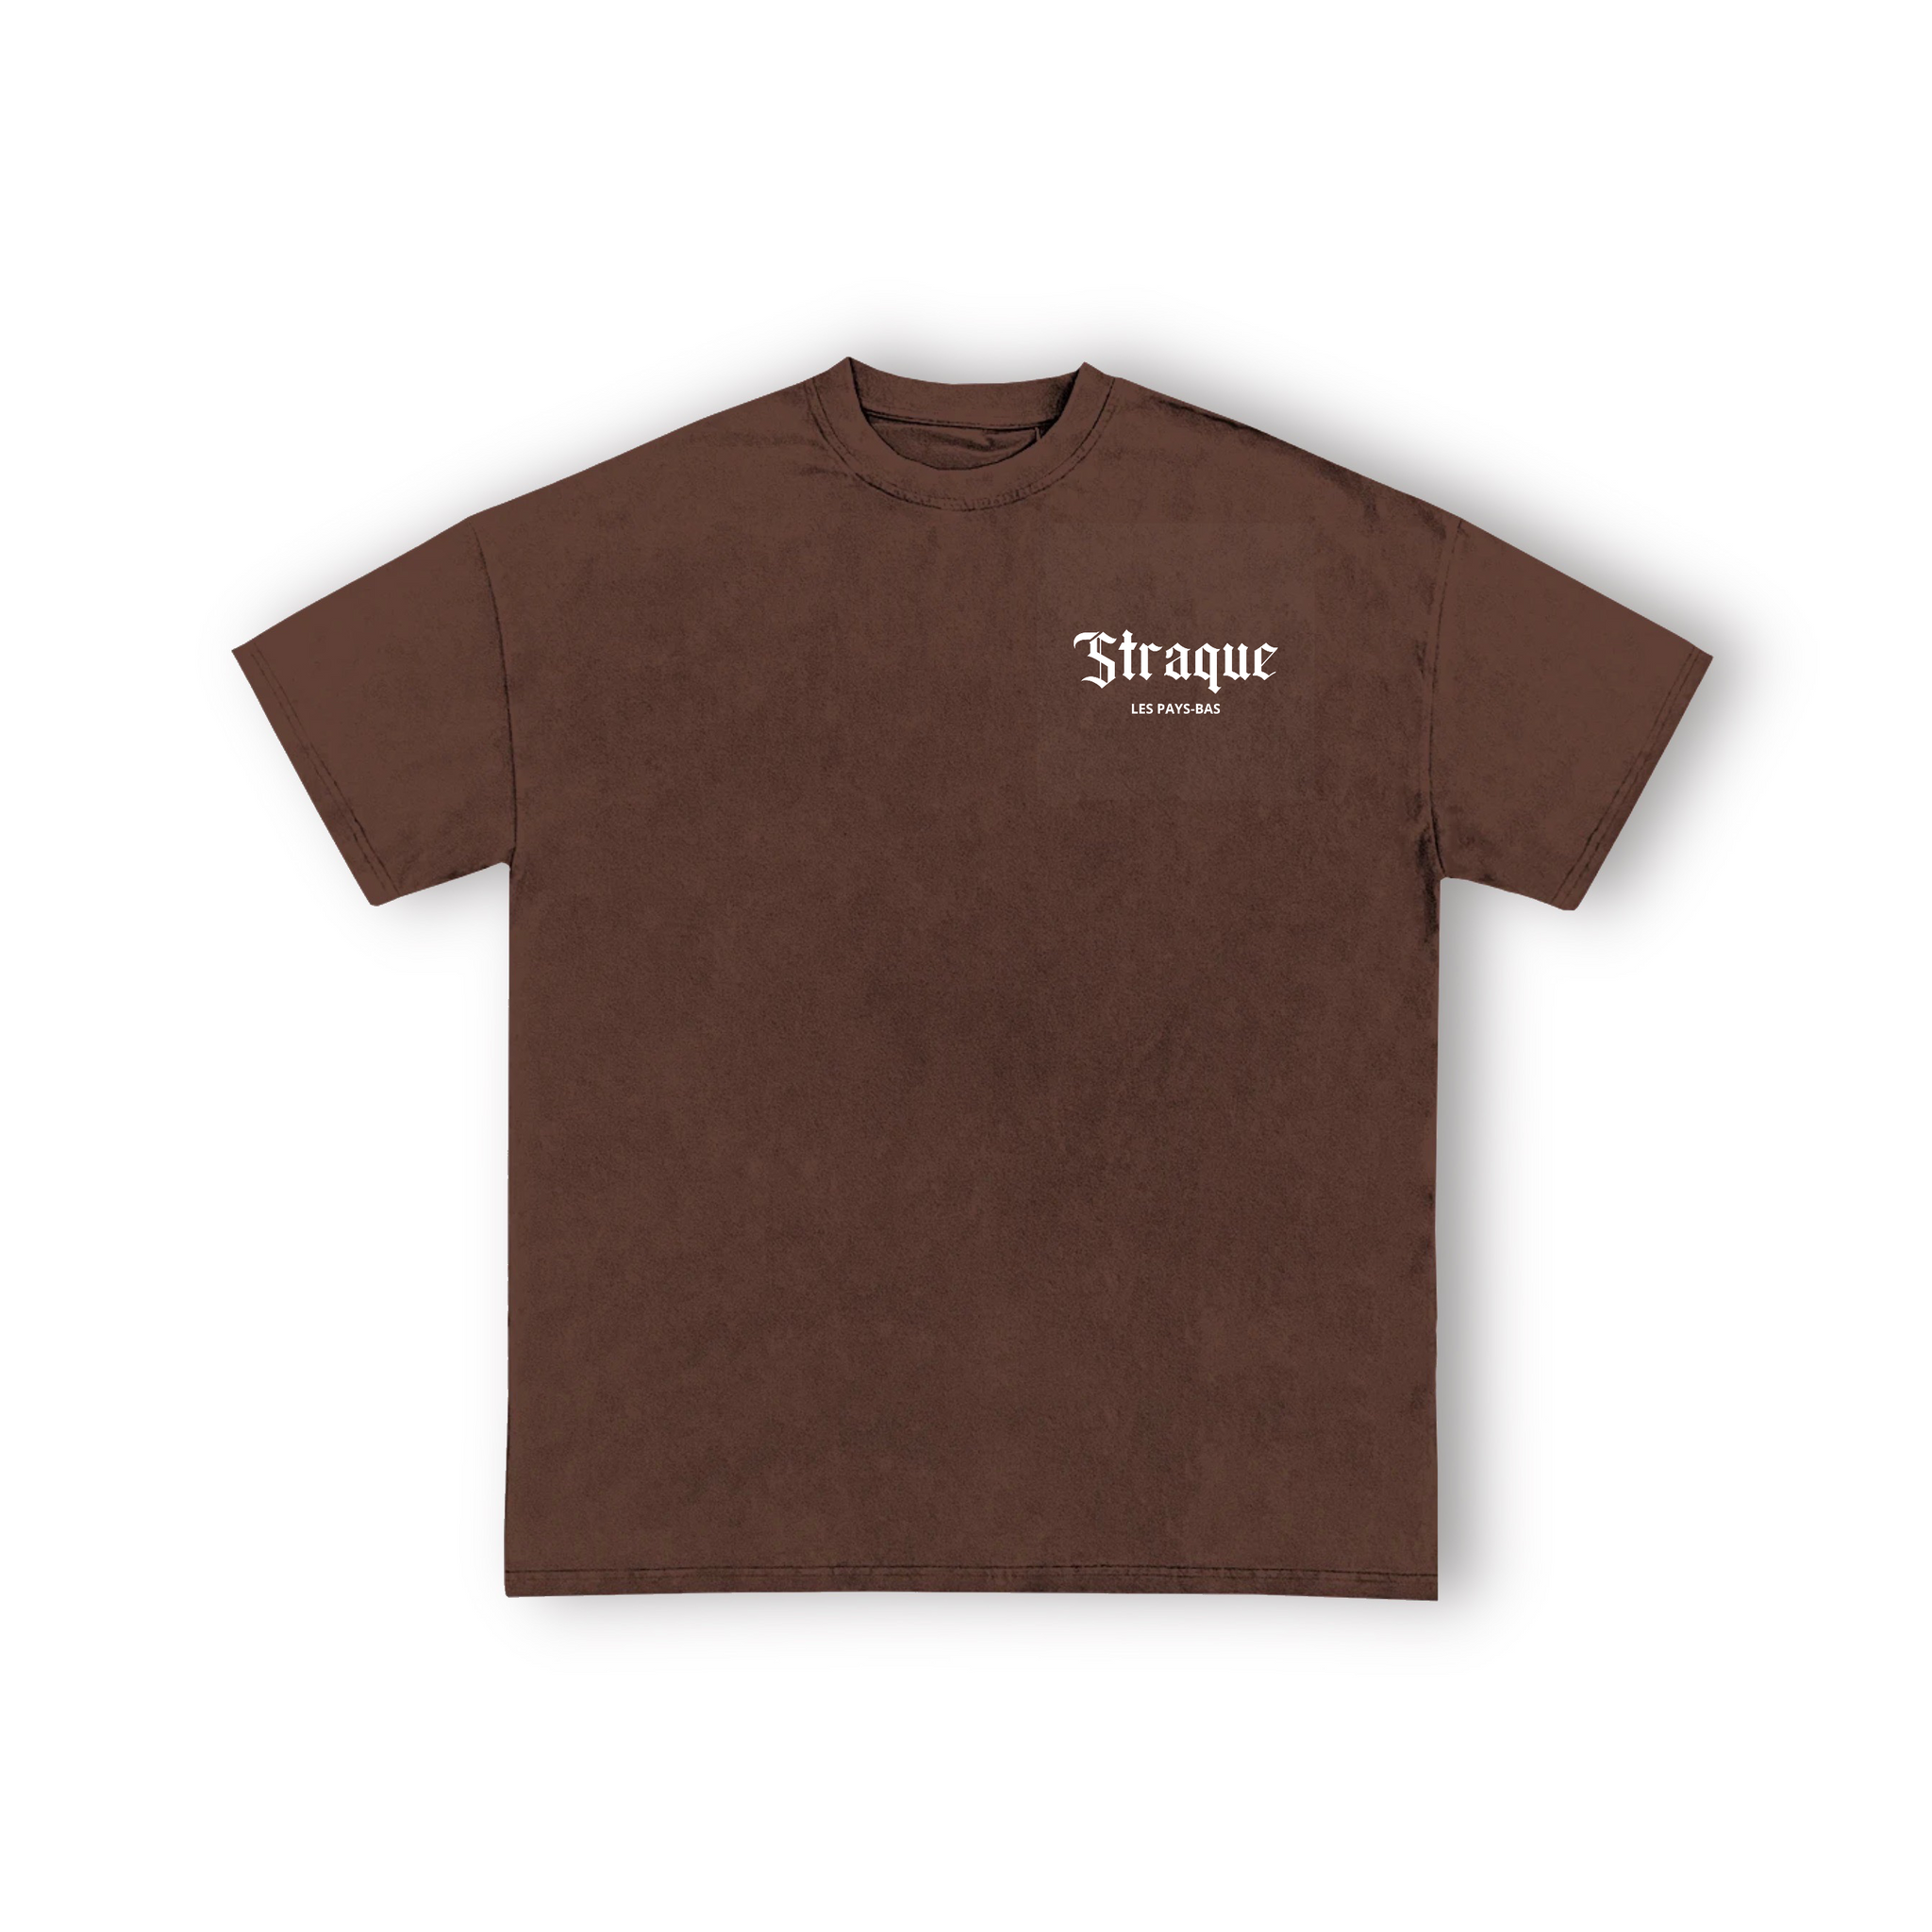 Straque: Ultra Luxury / Vintage Bruin - Straque Clothing